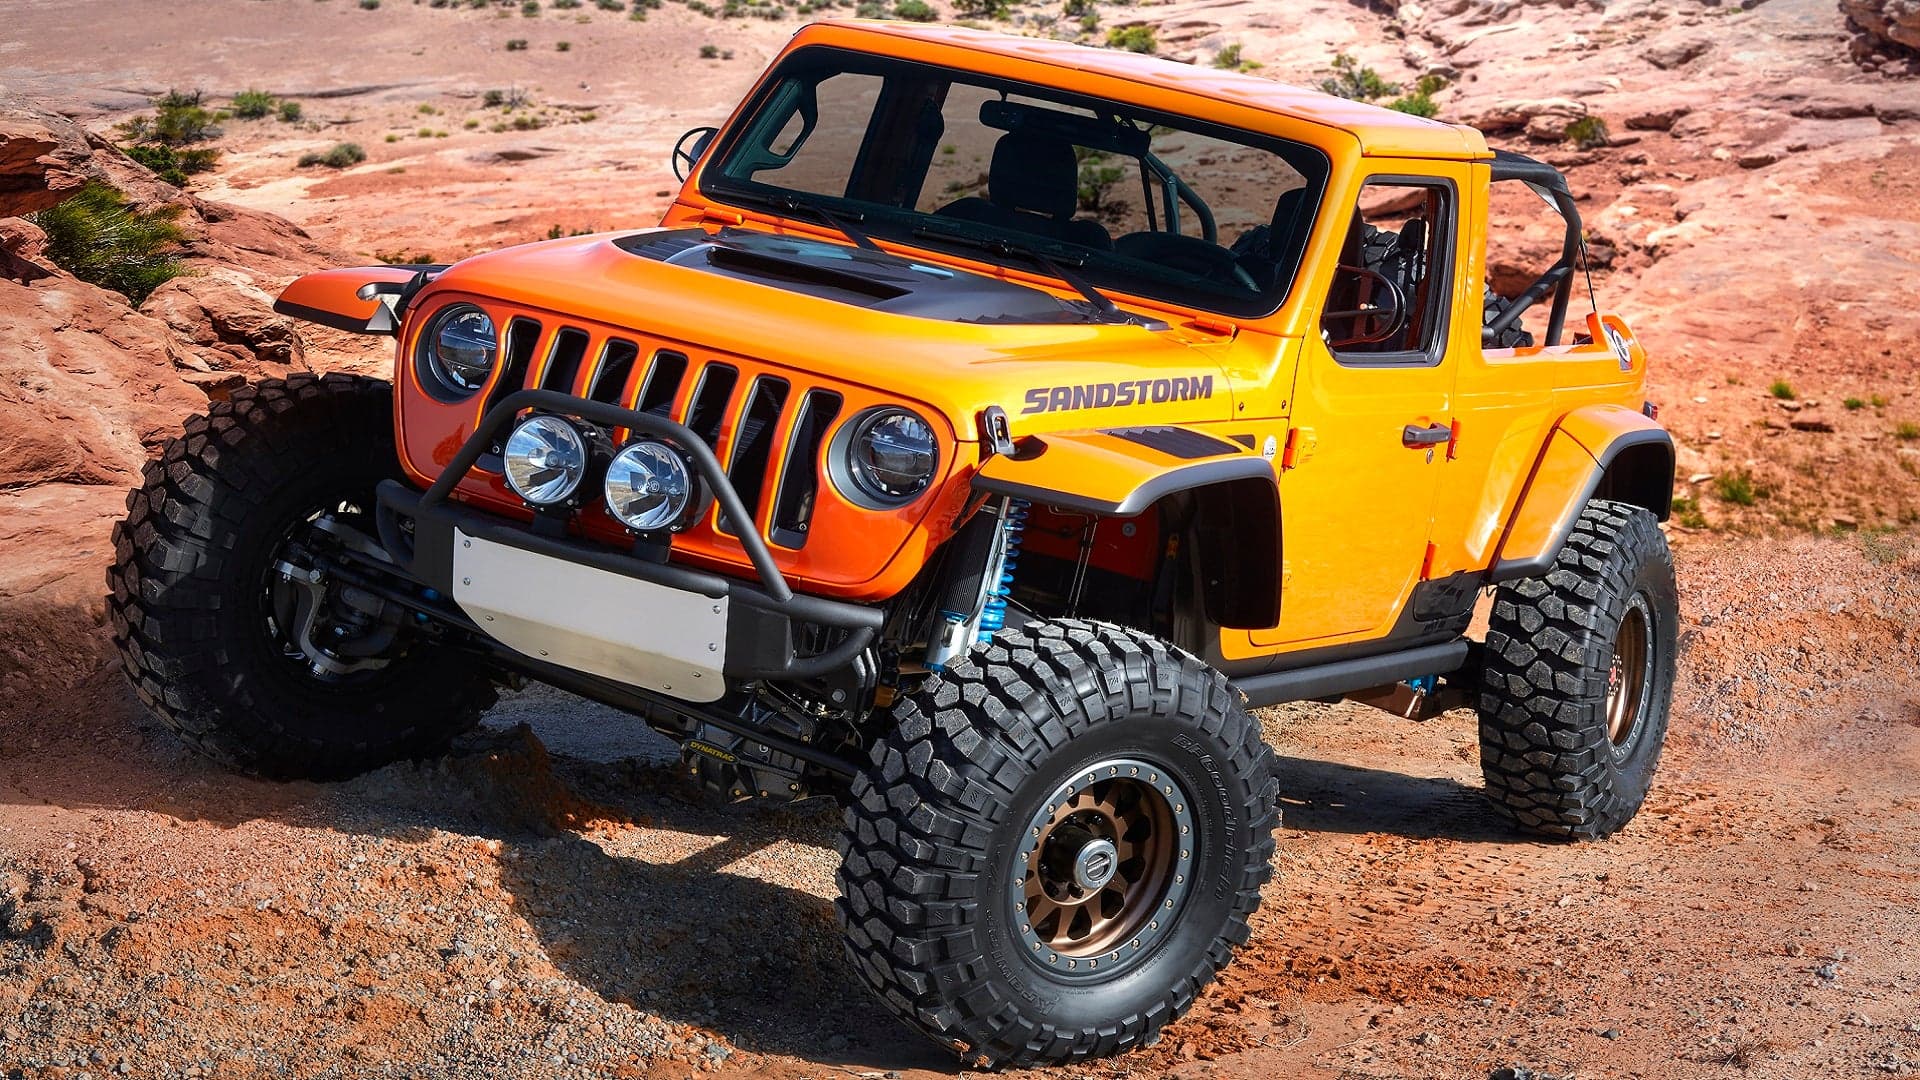 Jeep Shows off Seven Cool Concepts for the Annual Moab Easter Jeep Safari